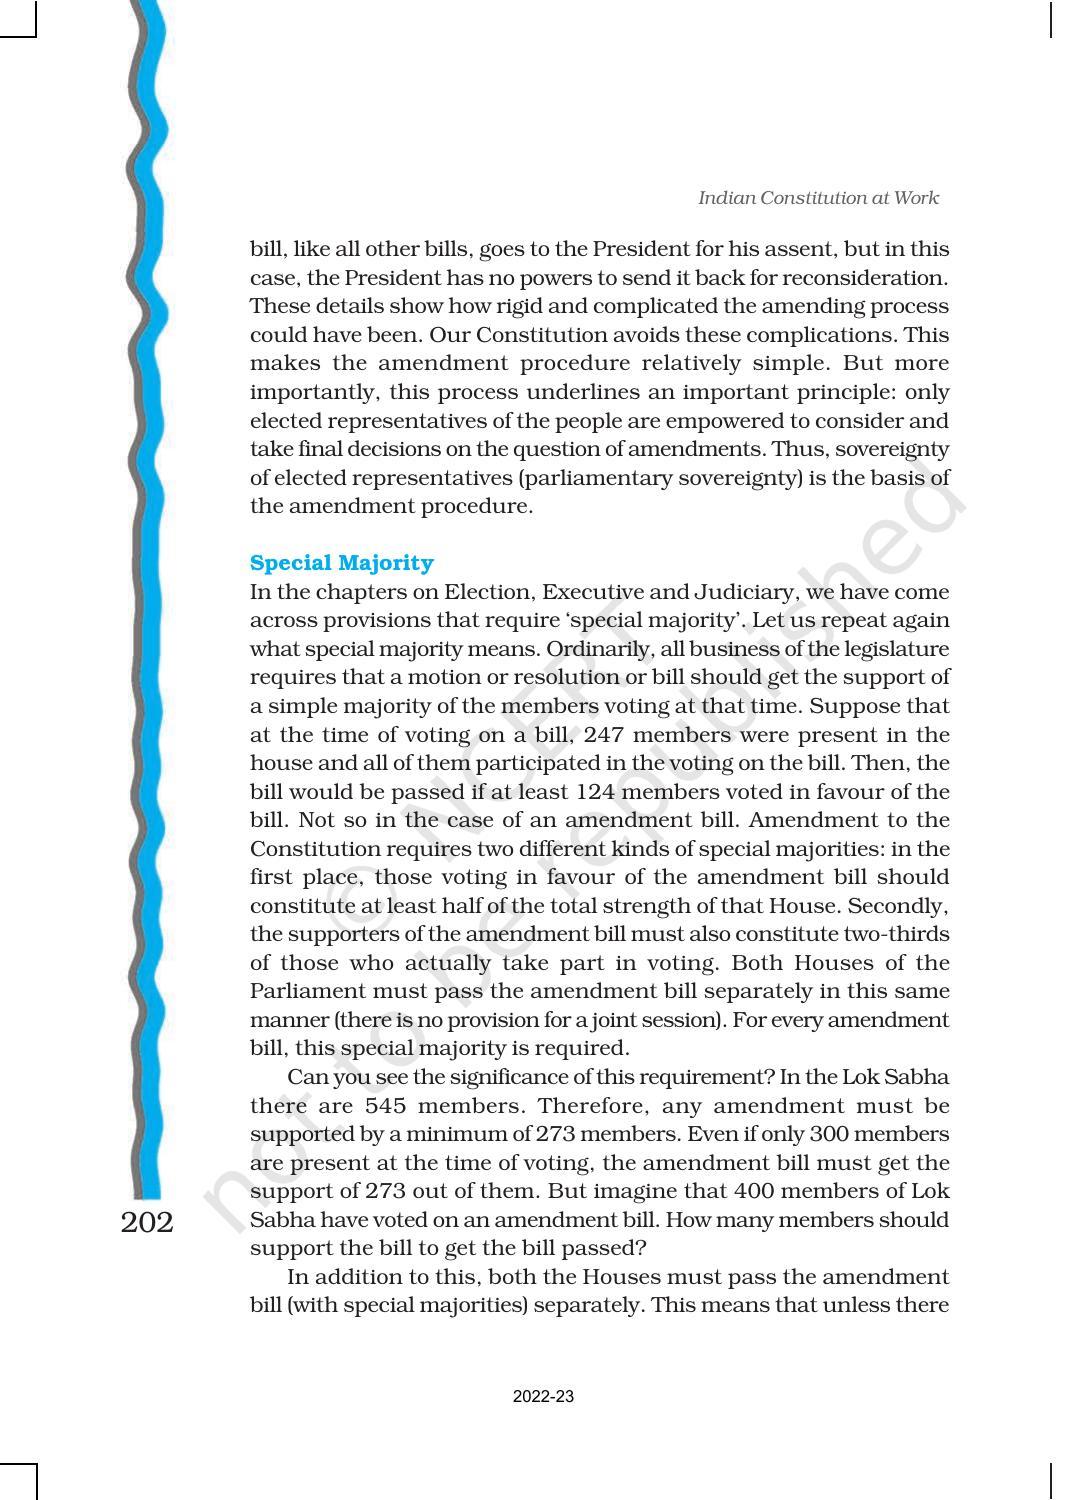 NCERT Book for Class 11 Political Science (Indian Constitution at Work) Chapter 9 Constitution as a Living Document - Page 7